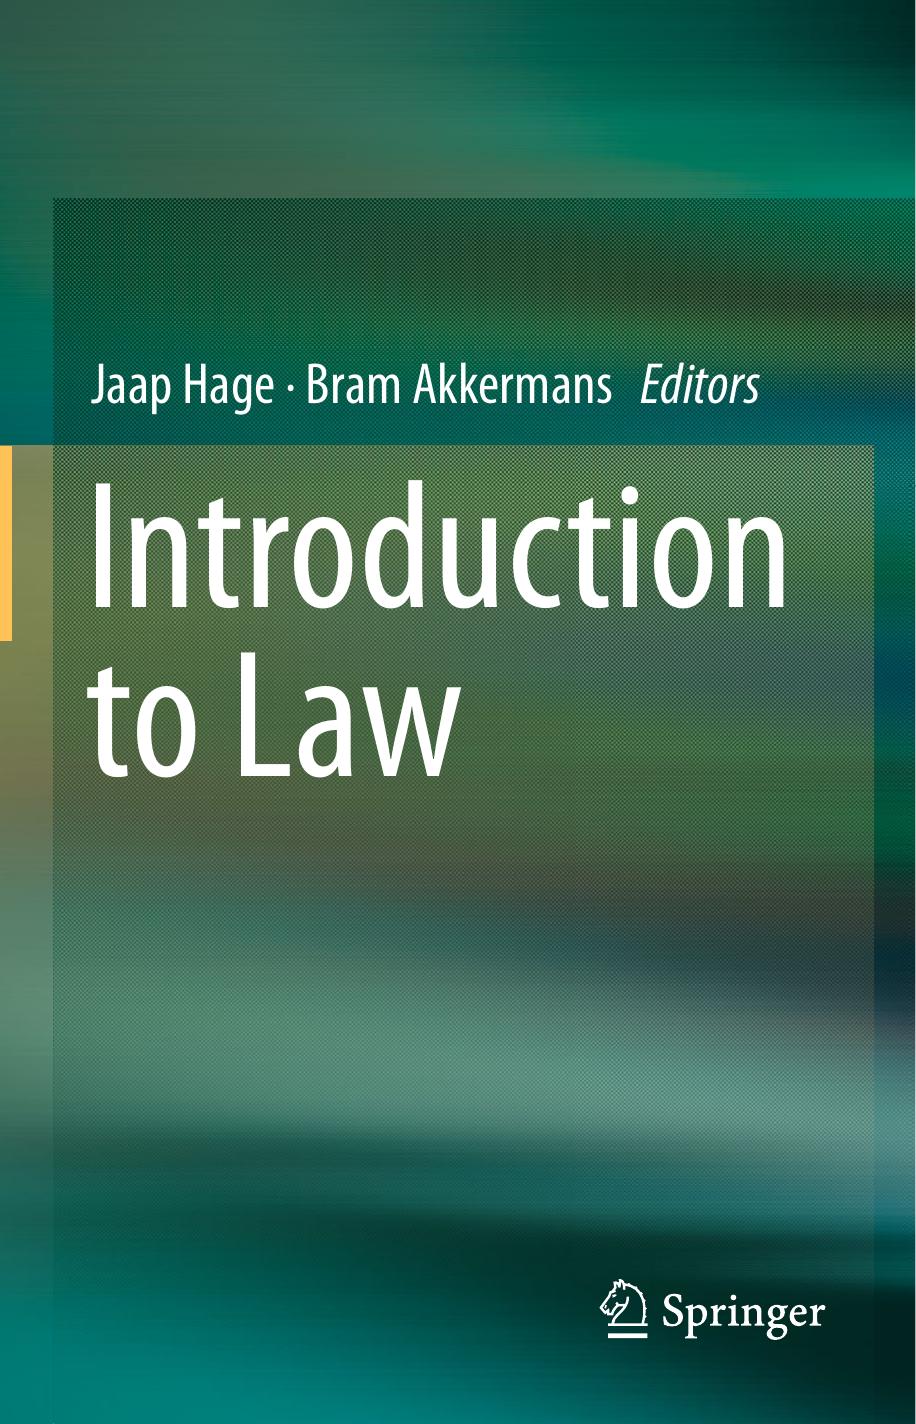 Introduction to Law, 2014